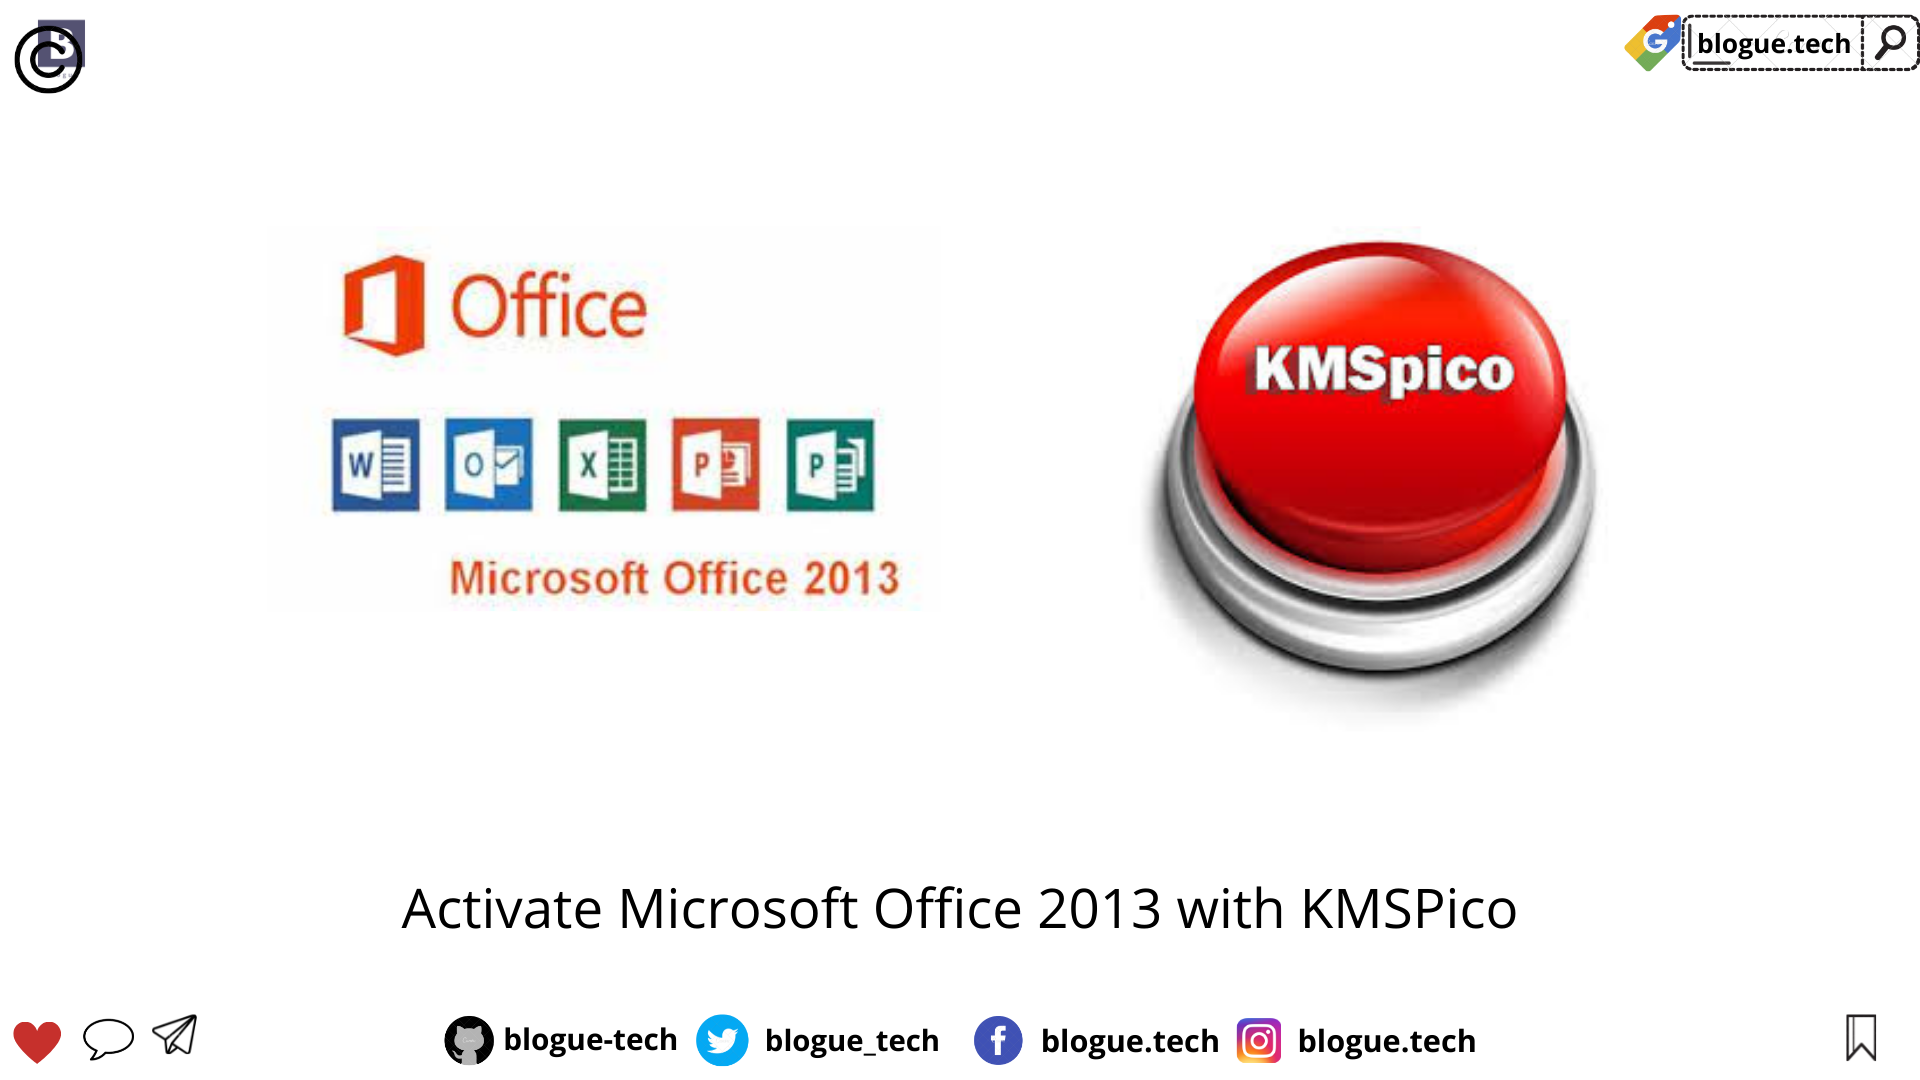 Activate Microsoft Office 2013 with KMSPico